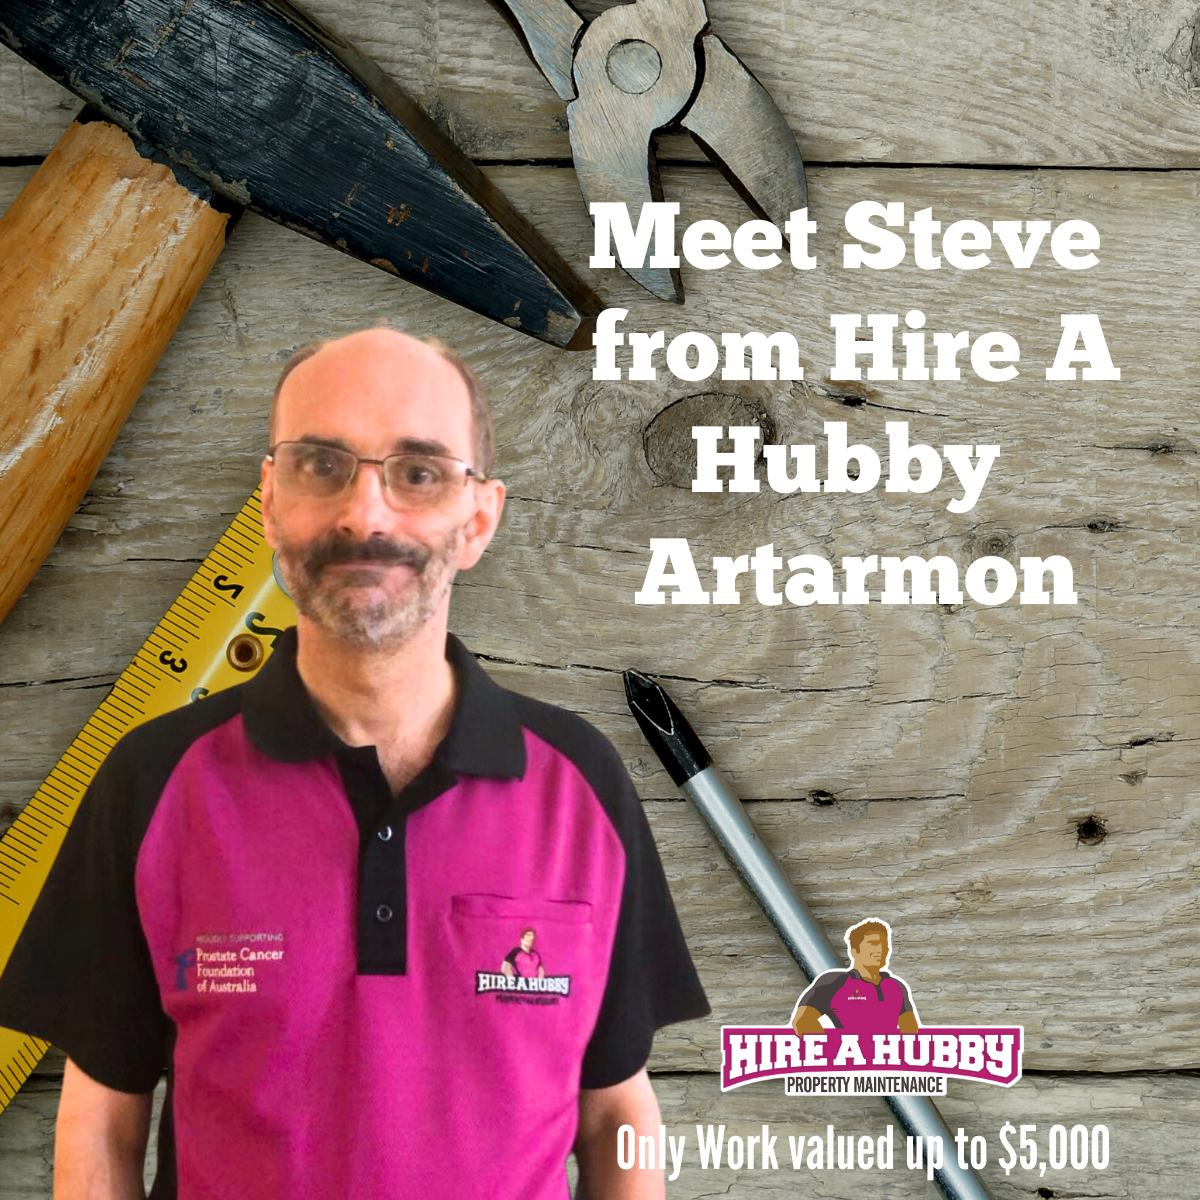 Steve, the new owner of Hire A Hubby Artarmon. Hire A Hubby Artarmon West Pymble 1800 803 339